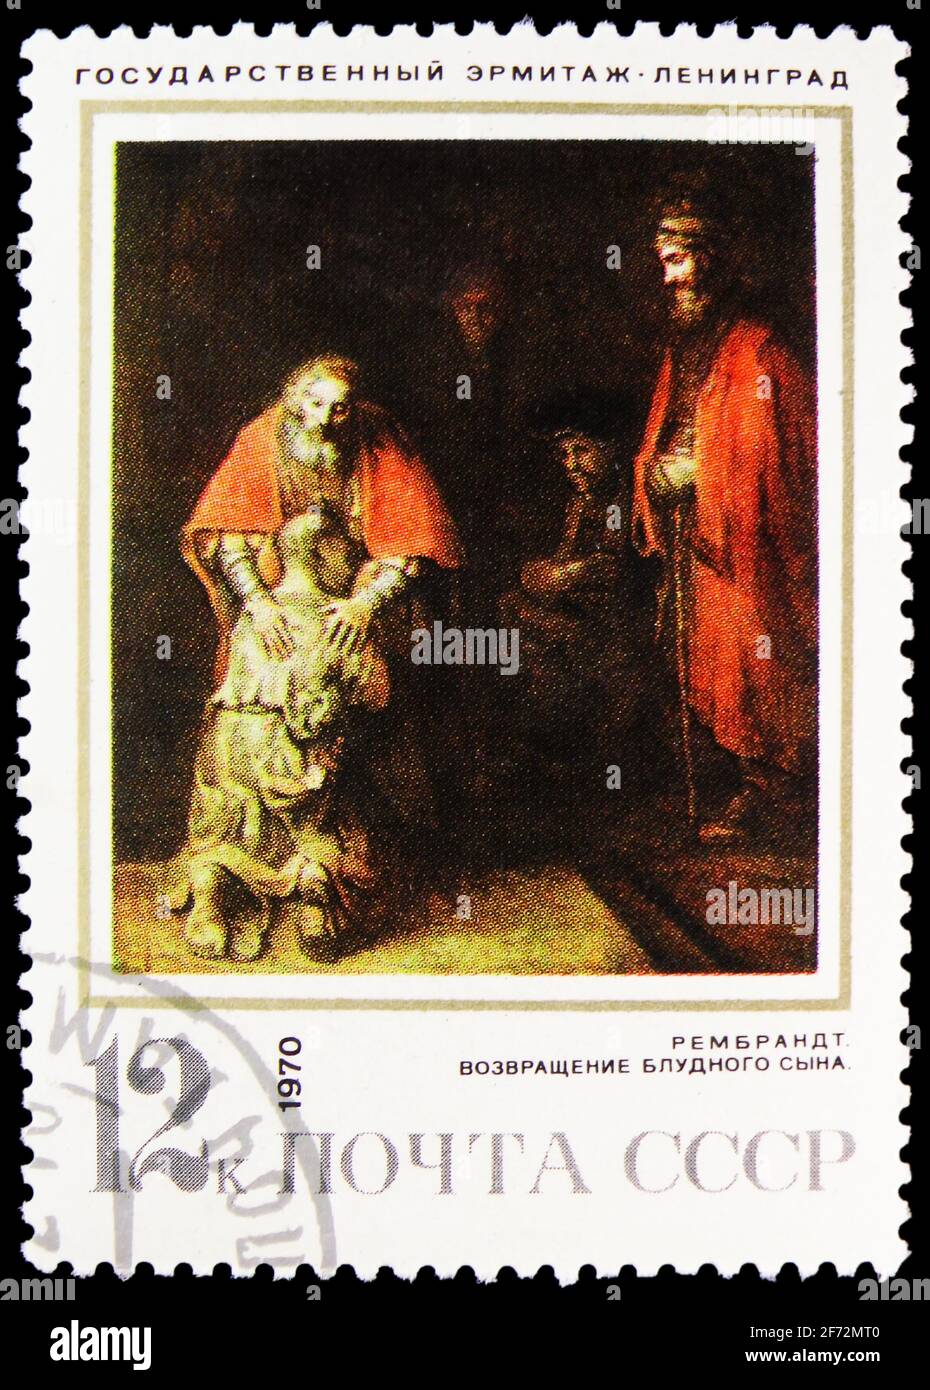 MOSCOW, RUSSIA - JANUARY 12, 2021: Postage stamp printed in USSR (Russia) shows Return of the Prodigal Son, Rembrandt (1669), Foreign Paintings in Sov Stock Photo